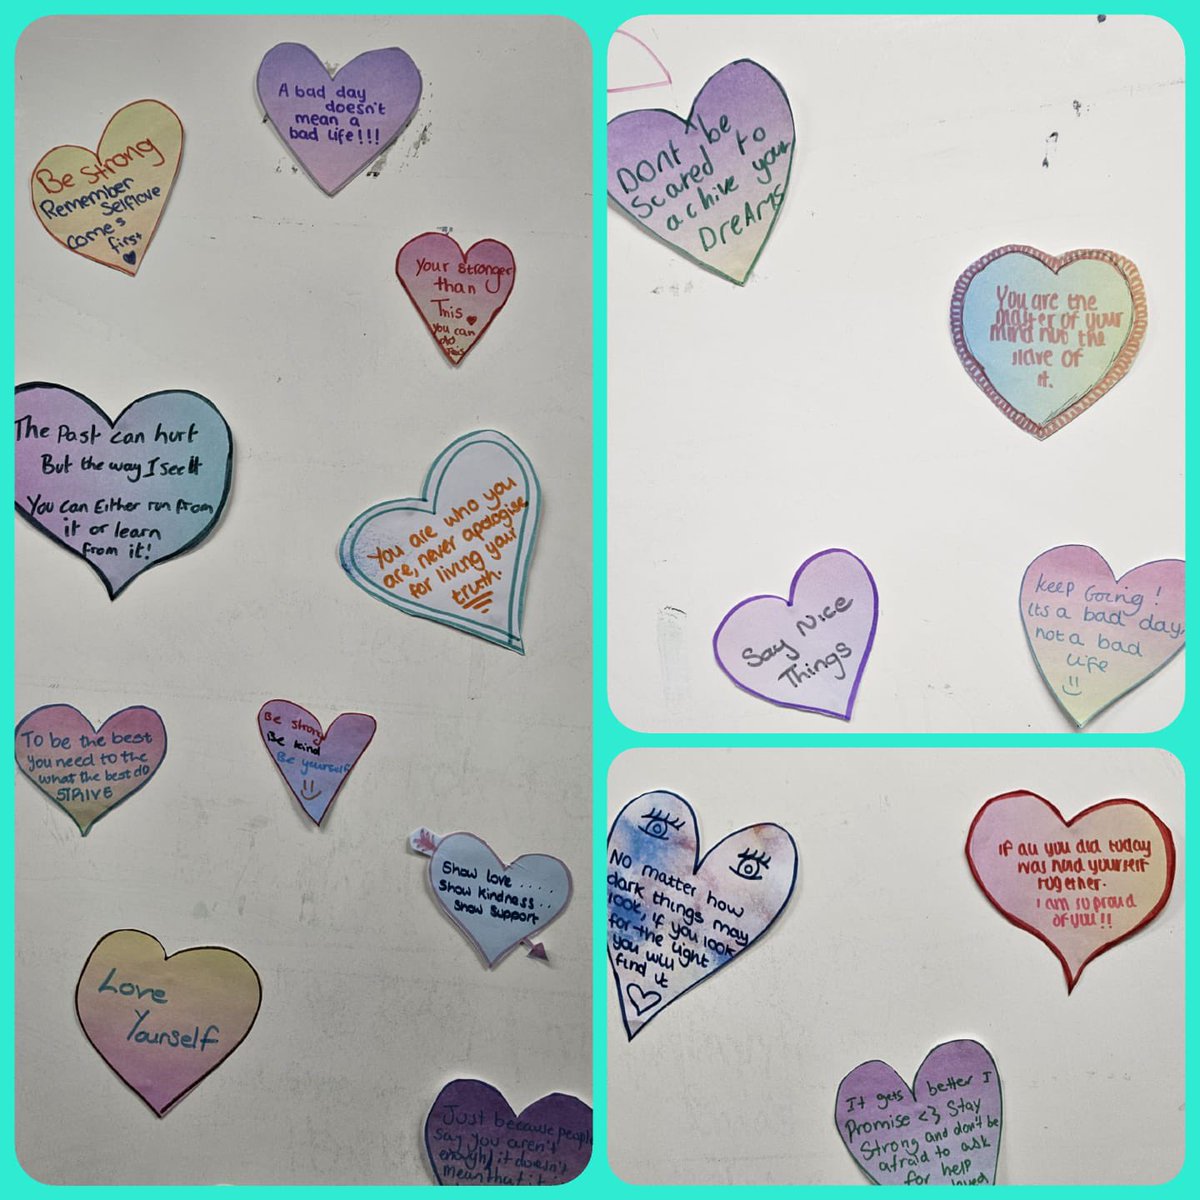 Youth clubs throughout Bradford West have been celebrating Children’s Mental Health week by drawing love hearts and writing a piece inside each one
#BradfordWest #childrensmentalhealthweek #TeamBradford #Bradford2025 #ADayInTheLifeOfAYouthWorker